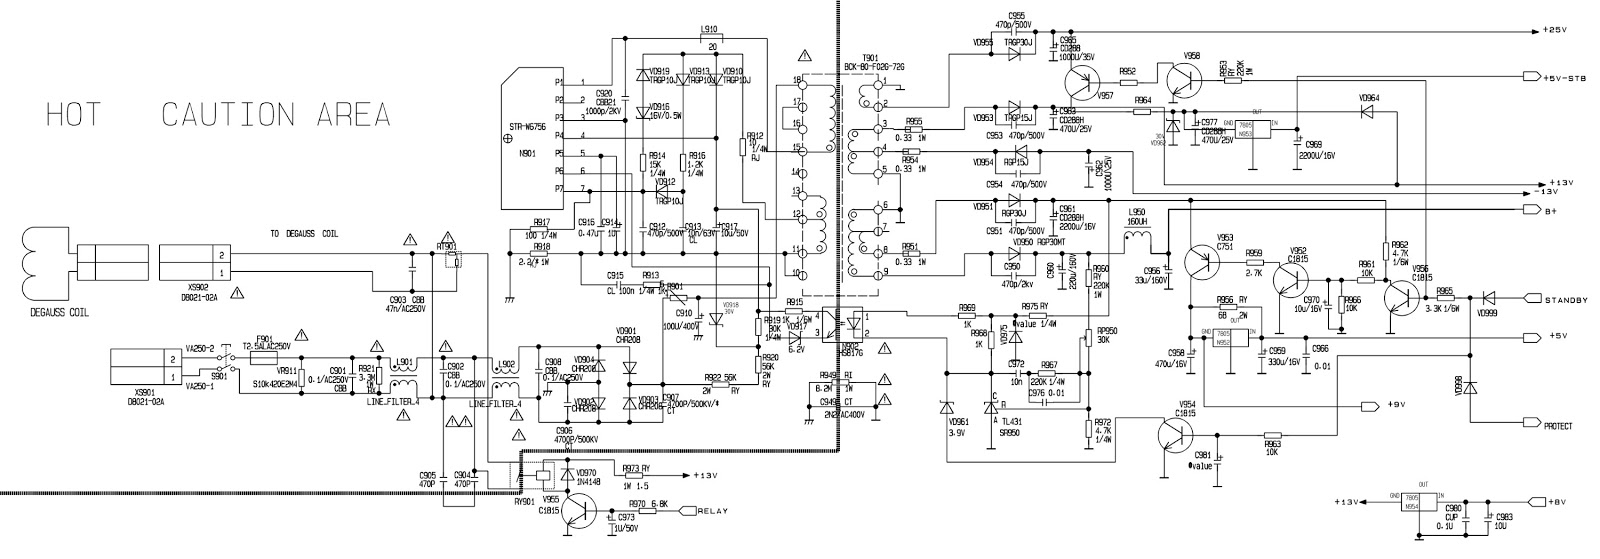 Electro help: STRW 6756 - TV POWER SUPPLY [SMPS] - SCHEMATIC - [Circuit